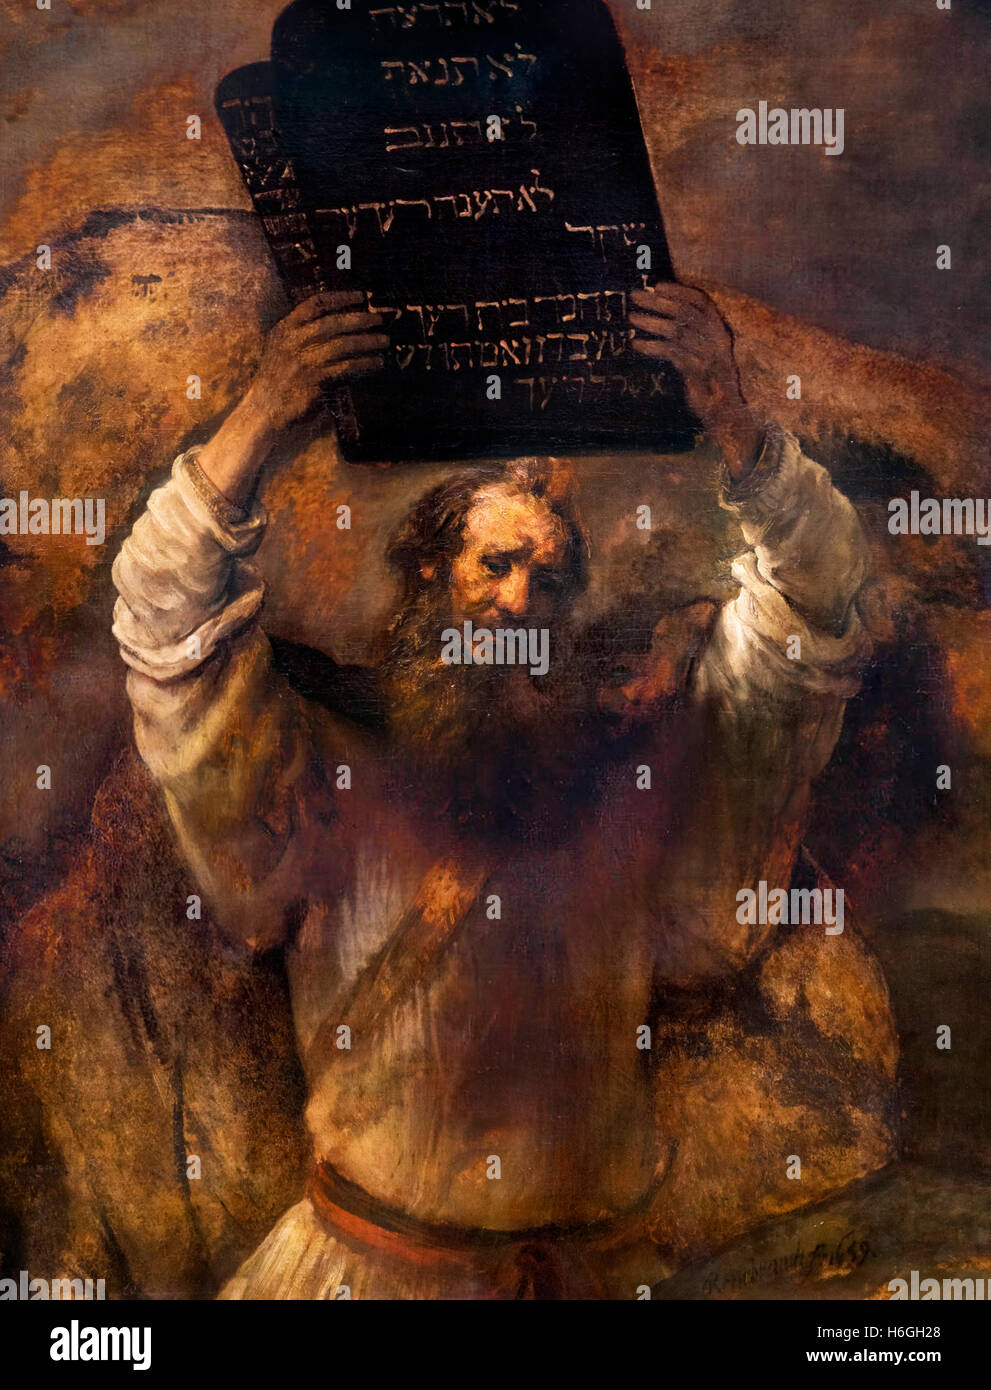 Moses Breaking the Tablets of the Law by Rembrandt van Rijn, oil on canvas, 1659. The painting depicst Moses smashing the tablets on which God had written the Ten Commandments. Stock Photo